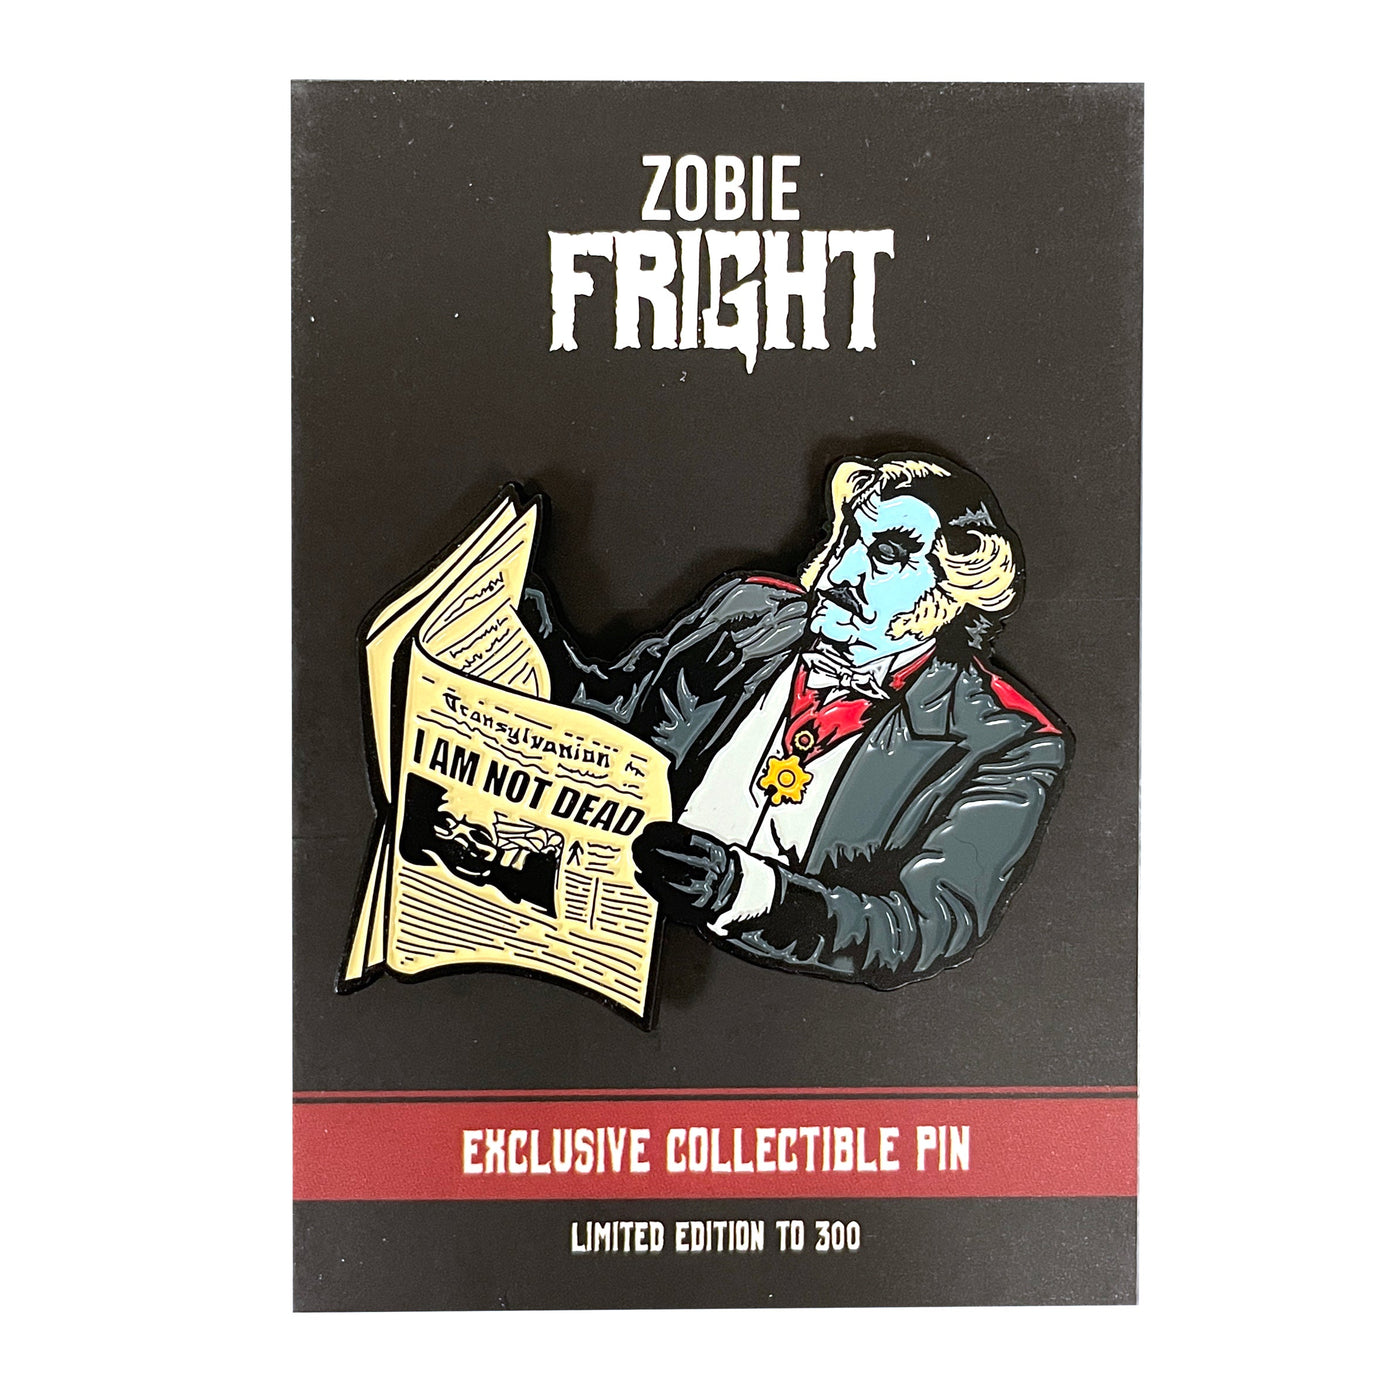 Zobie Fright Exclusive 2" Enamel Pin - The Munsters "The Count"